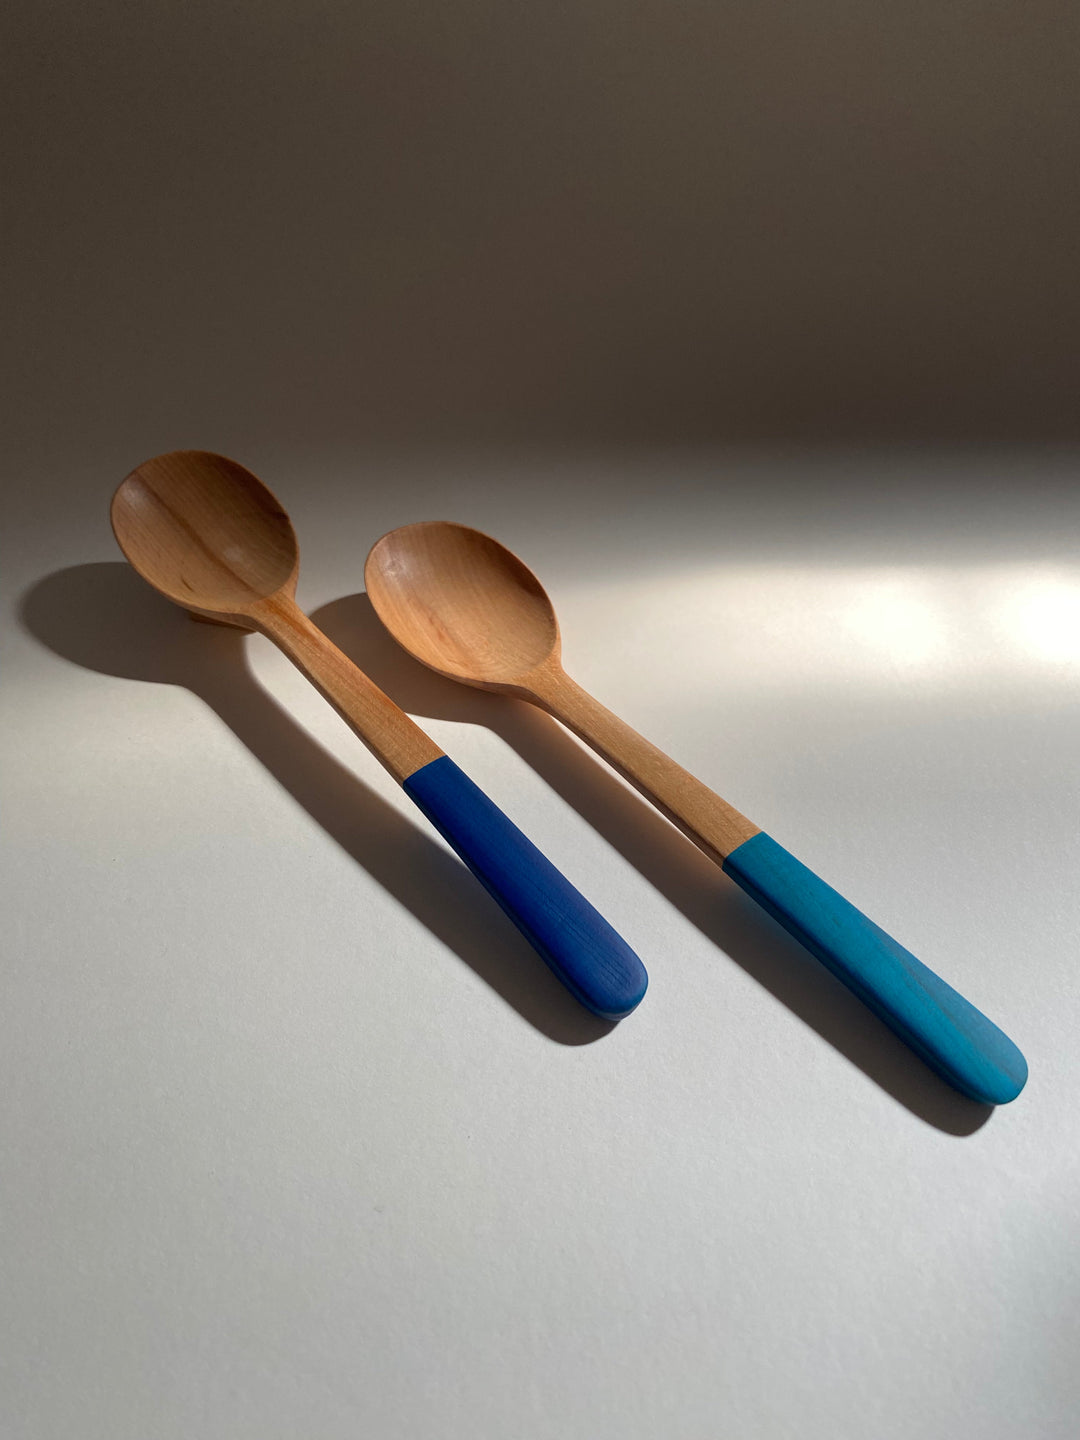 Japanese wooden spoon in light indigo lacquer